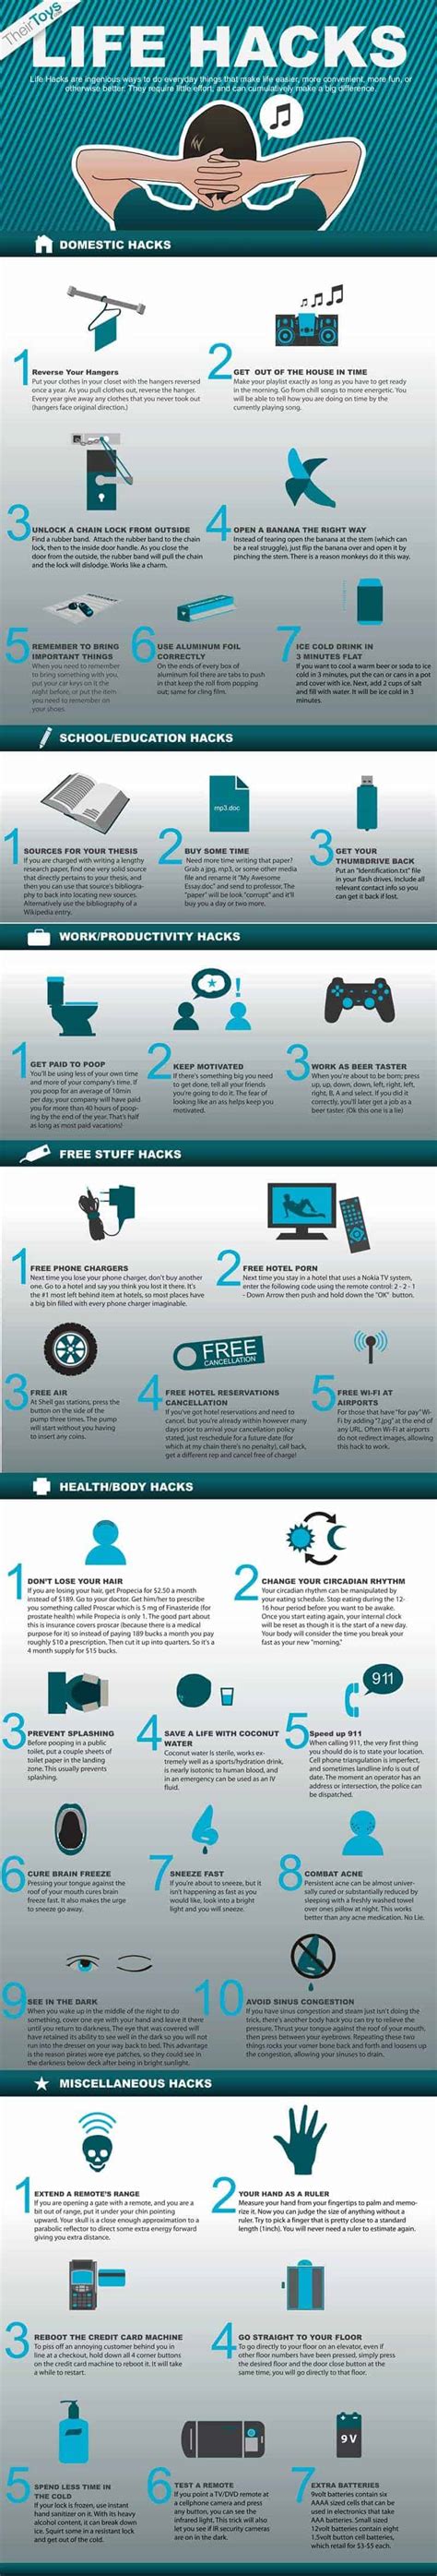 Life Hacks Daily Infographic